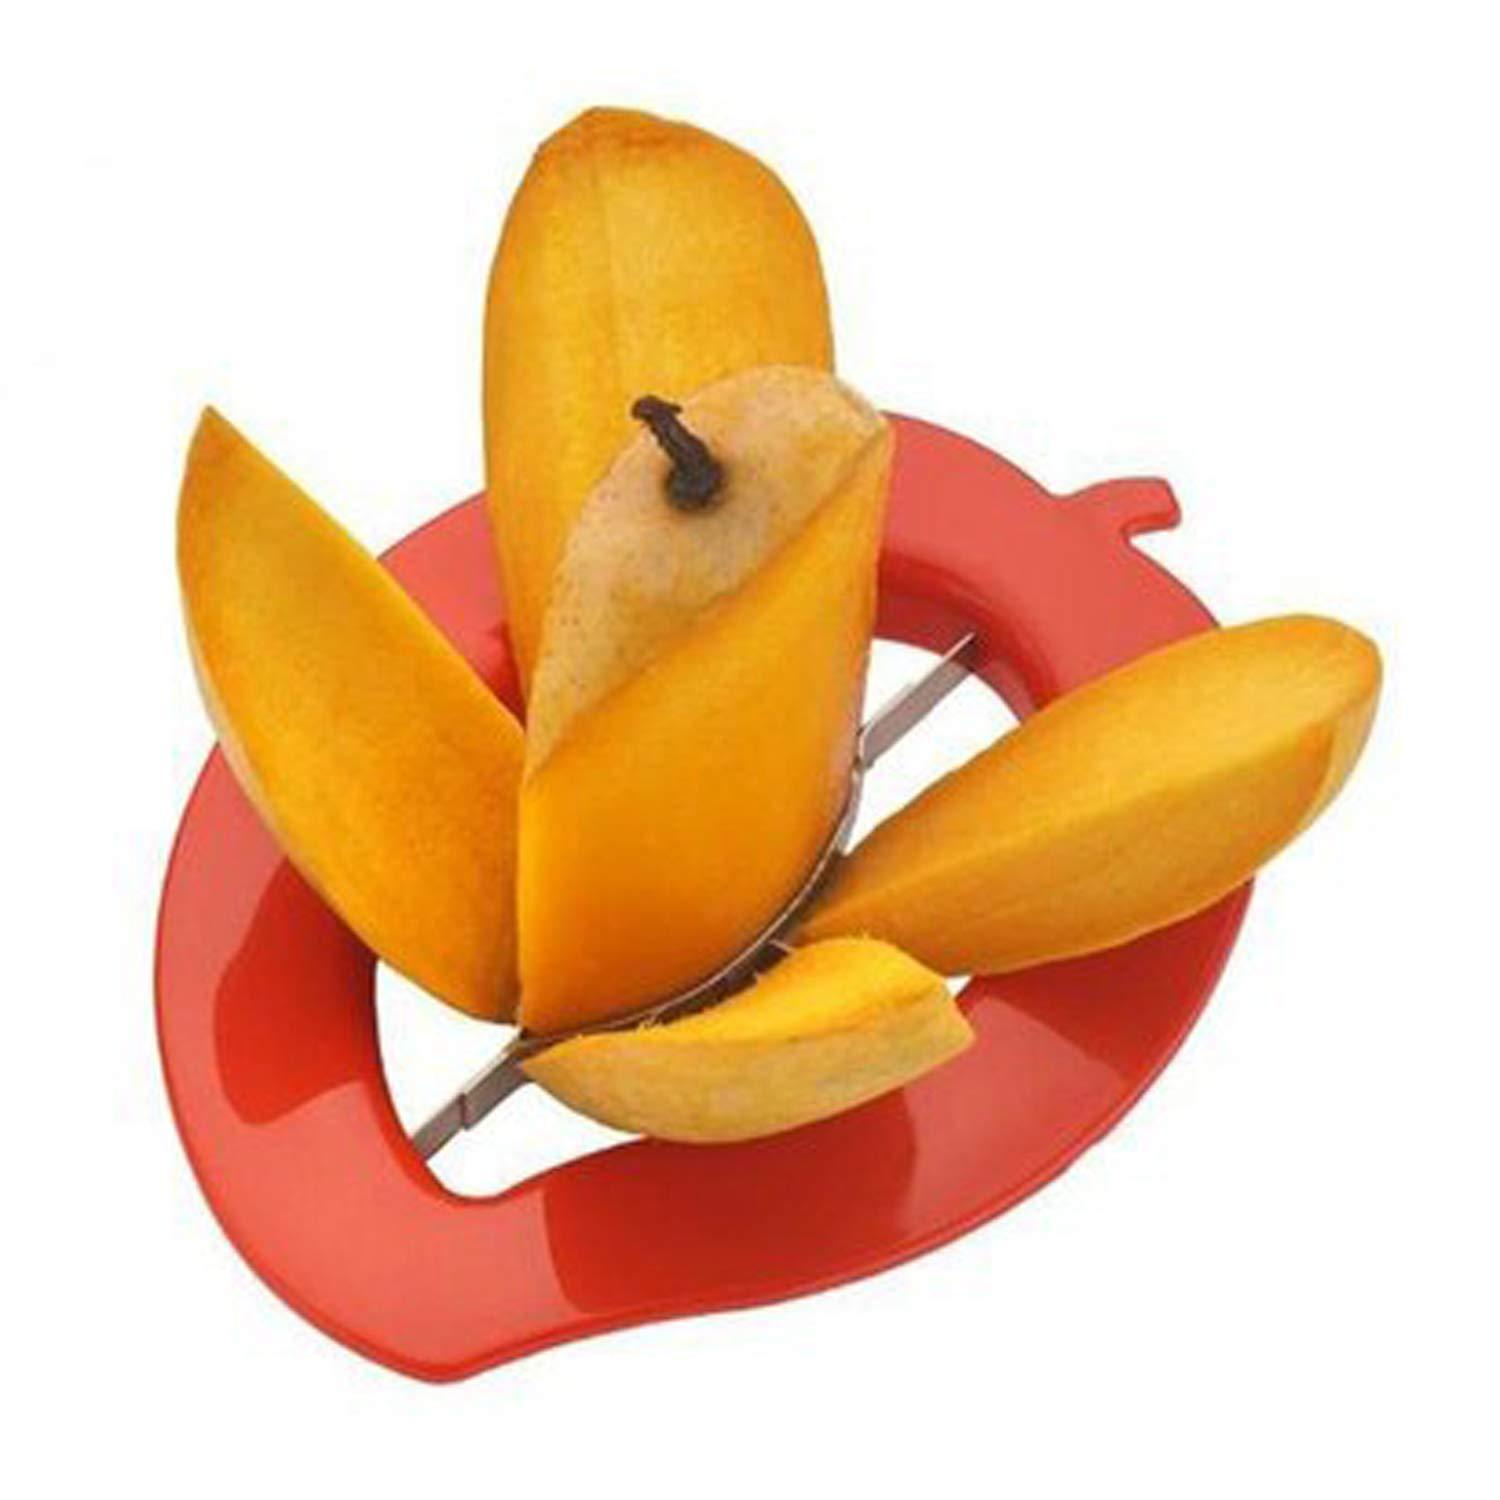 2356 Mango Cutter Chopper Slicer Tool Slicing With Non Slip Handles - SkyShopy